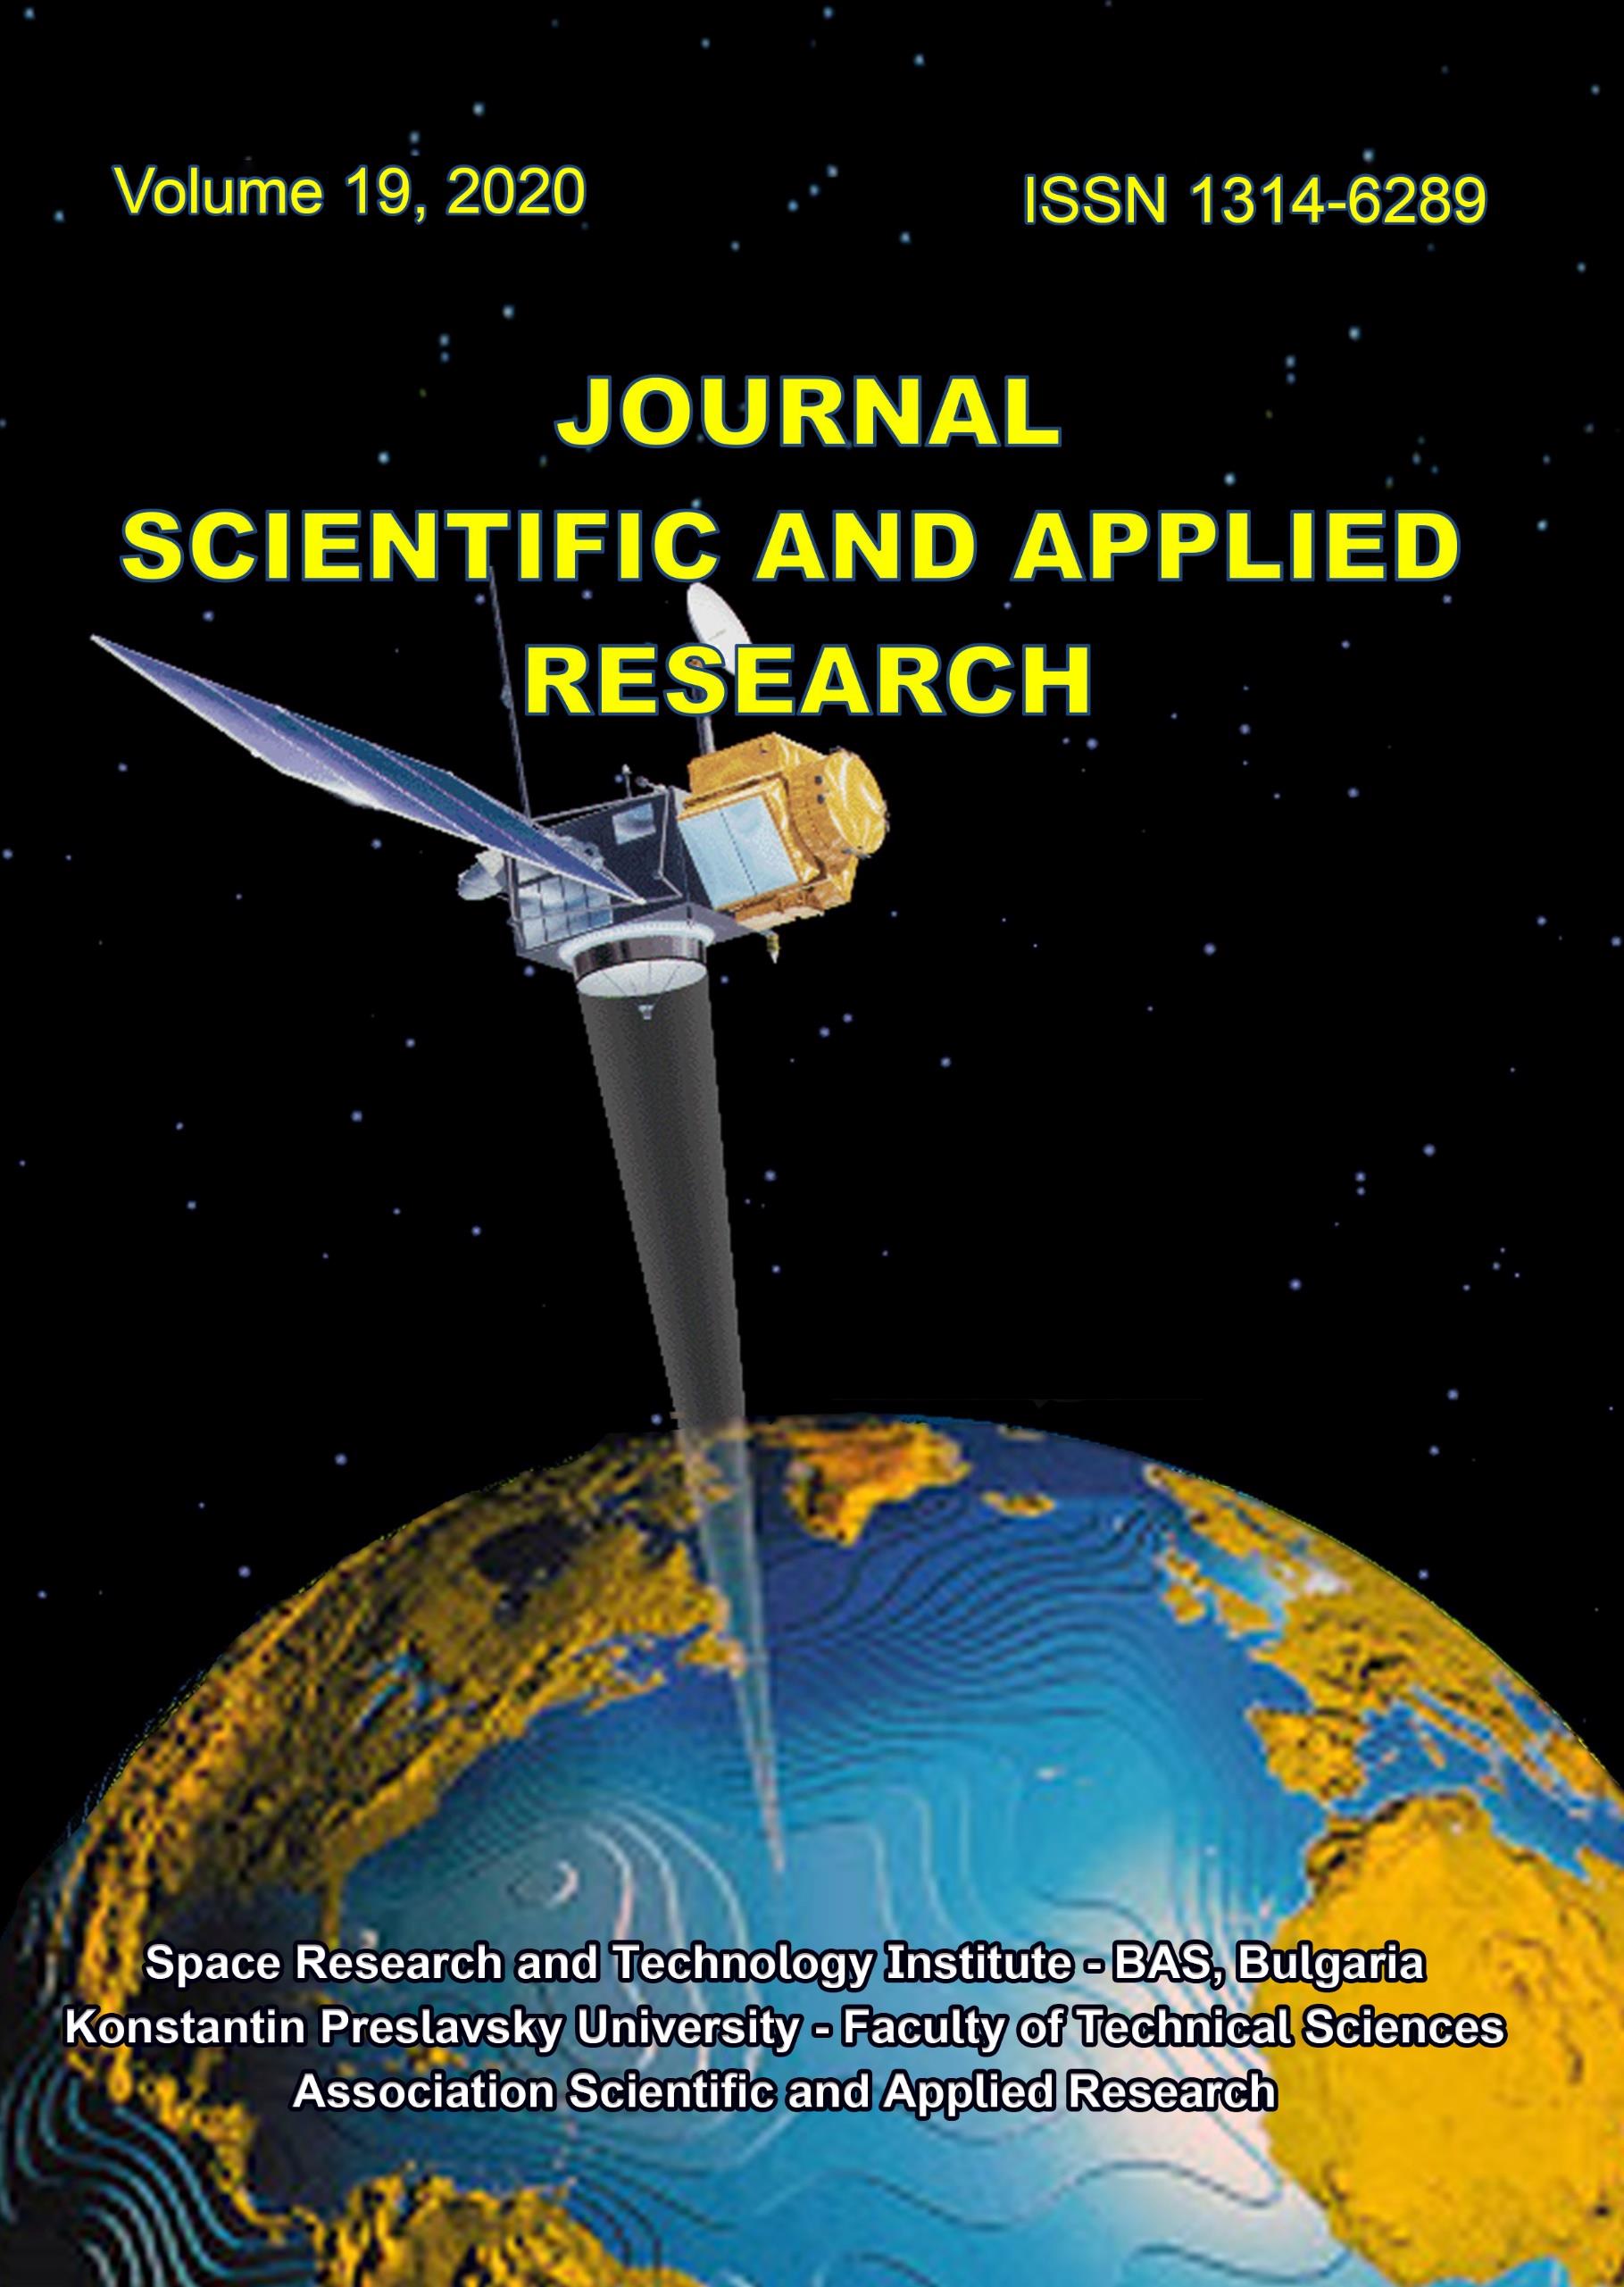 					View Vol. 19 No. 1 (2020): Journal Scientific and Applied Research
				